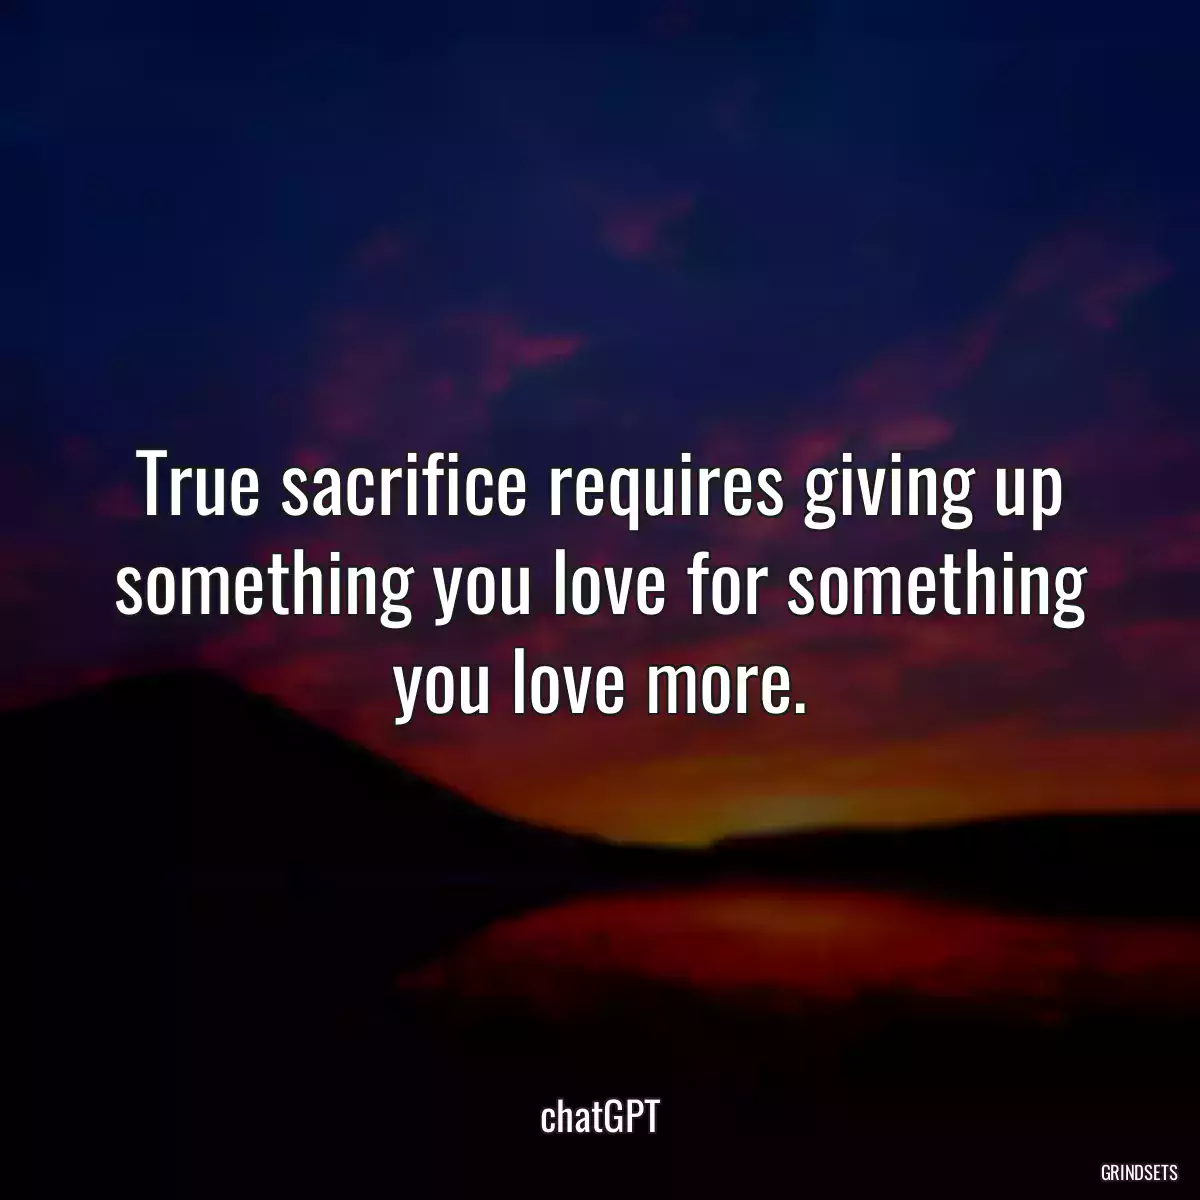 True sacrifice requires giving up something you love for something you love more.